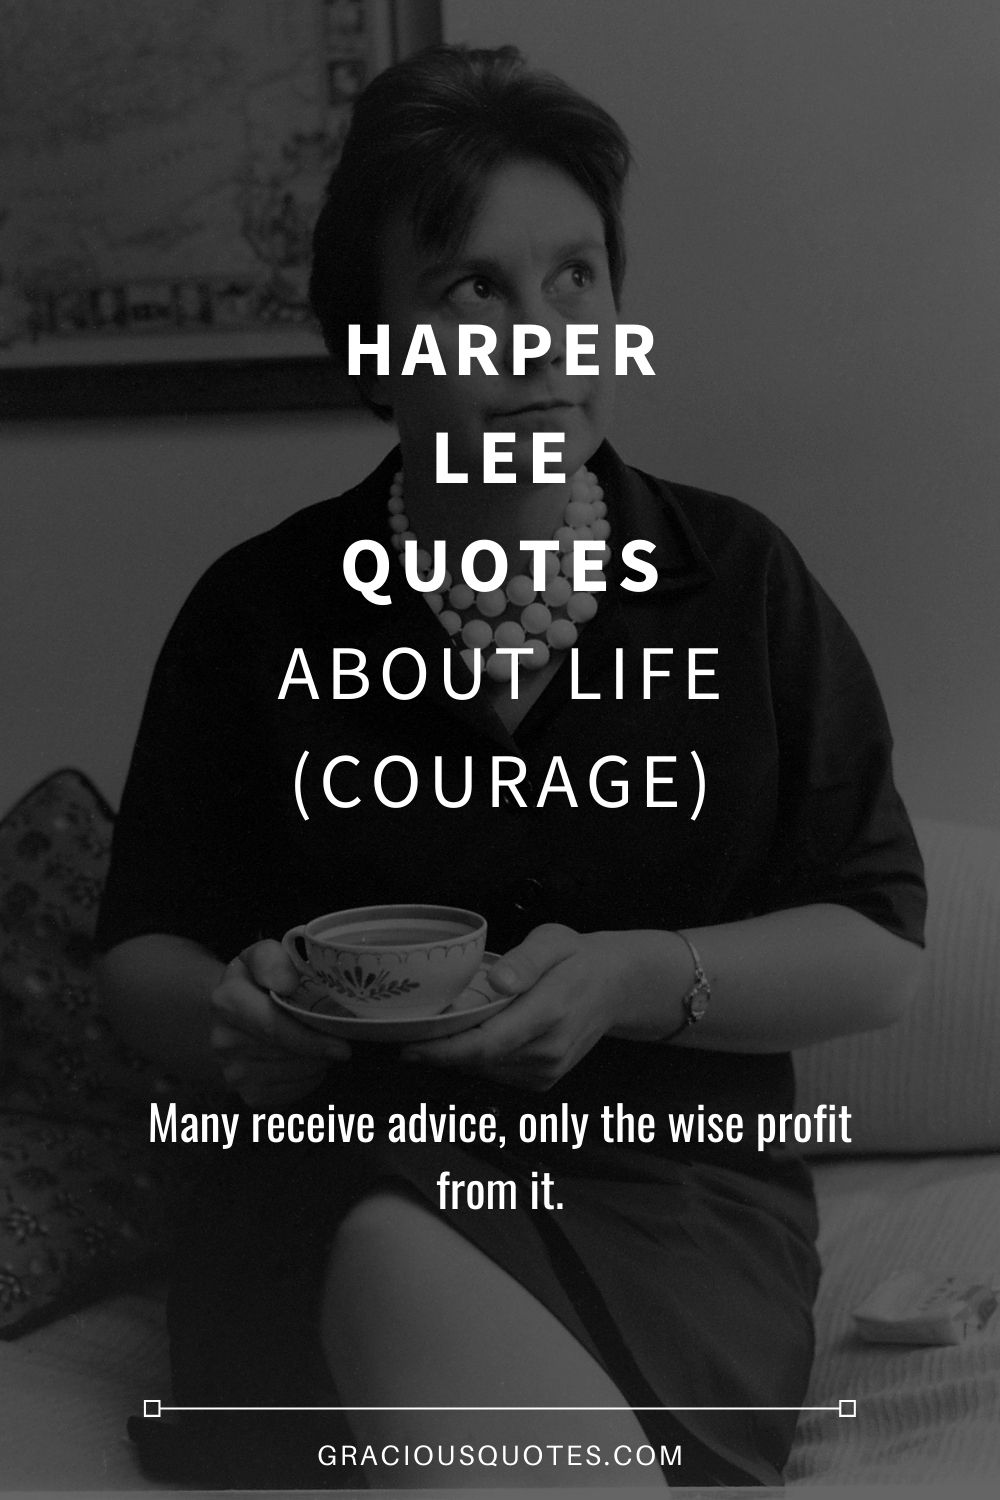 Harper Lee Quotes About Life (COURAGE) - Gracious Quotes